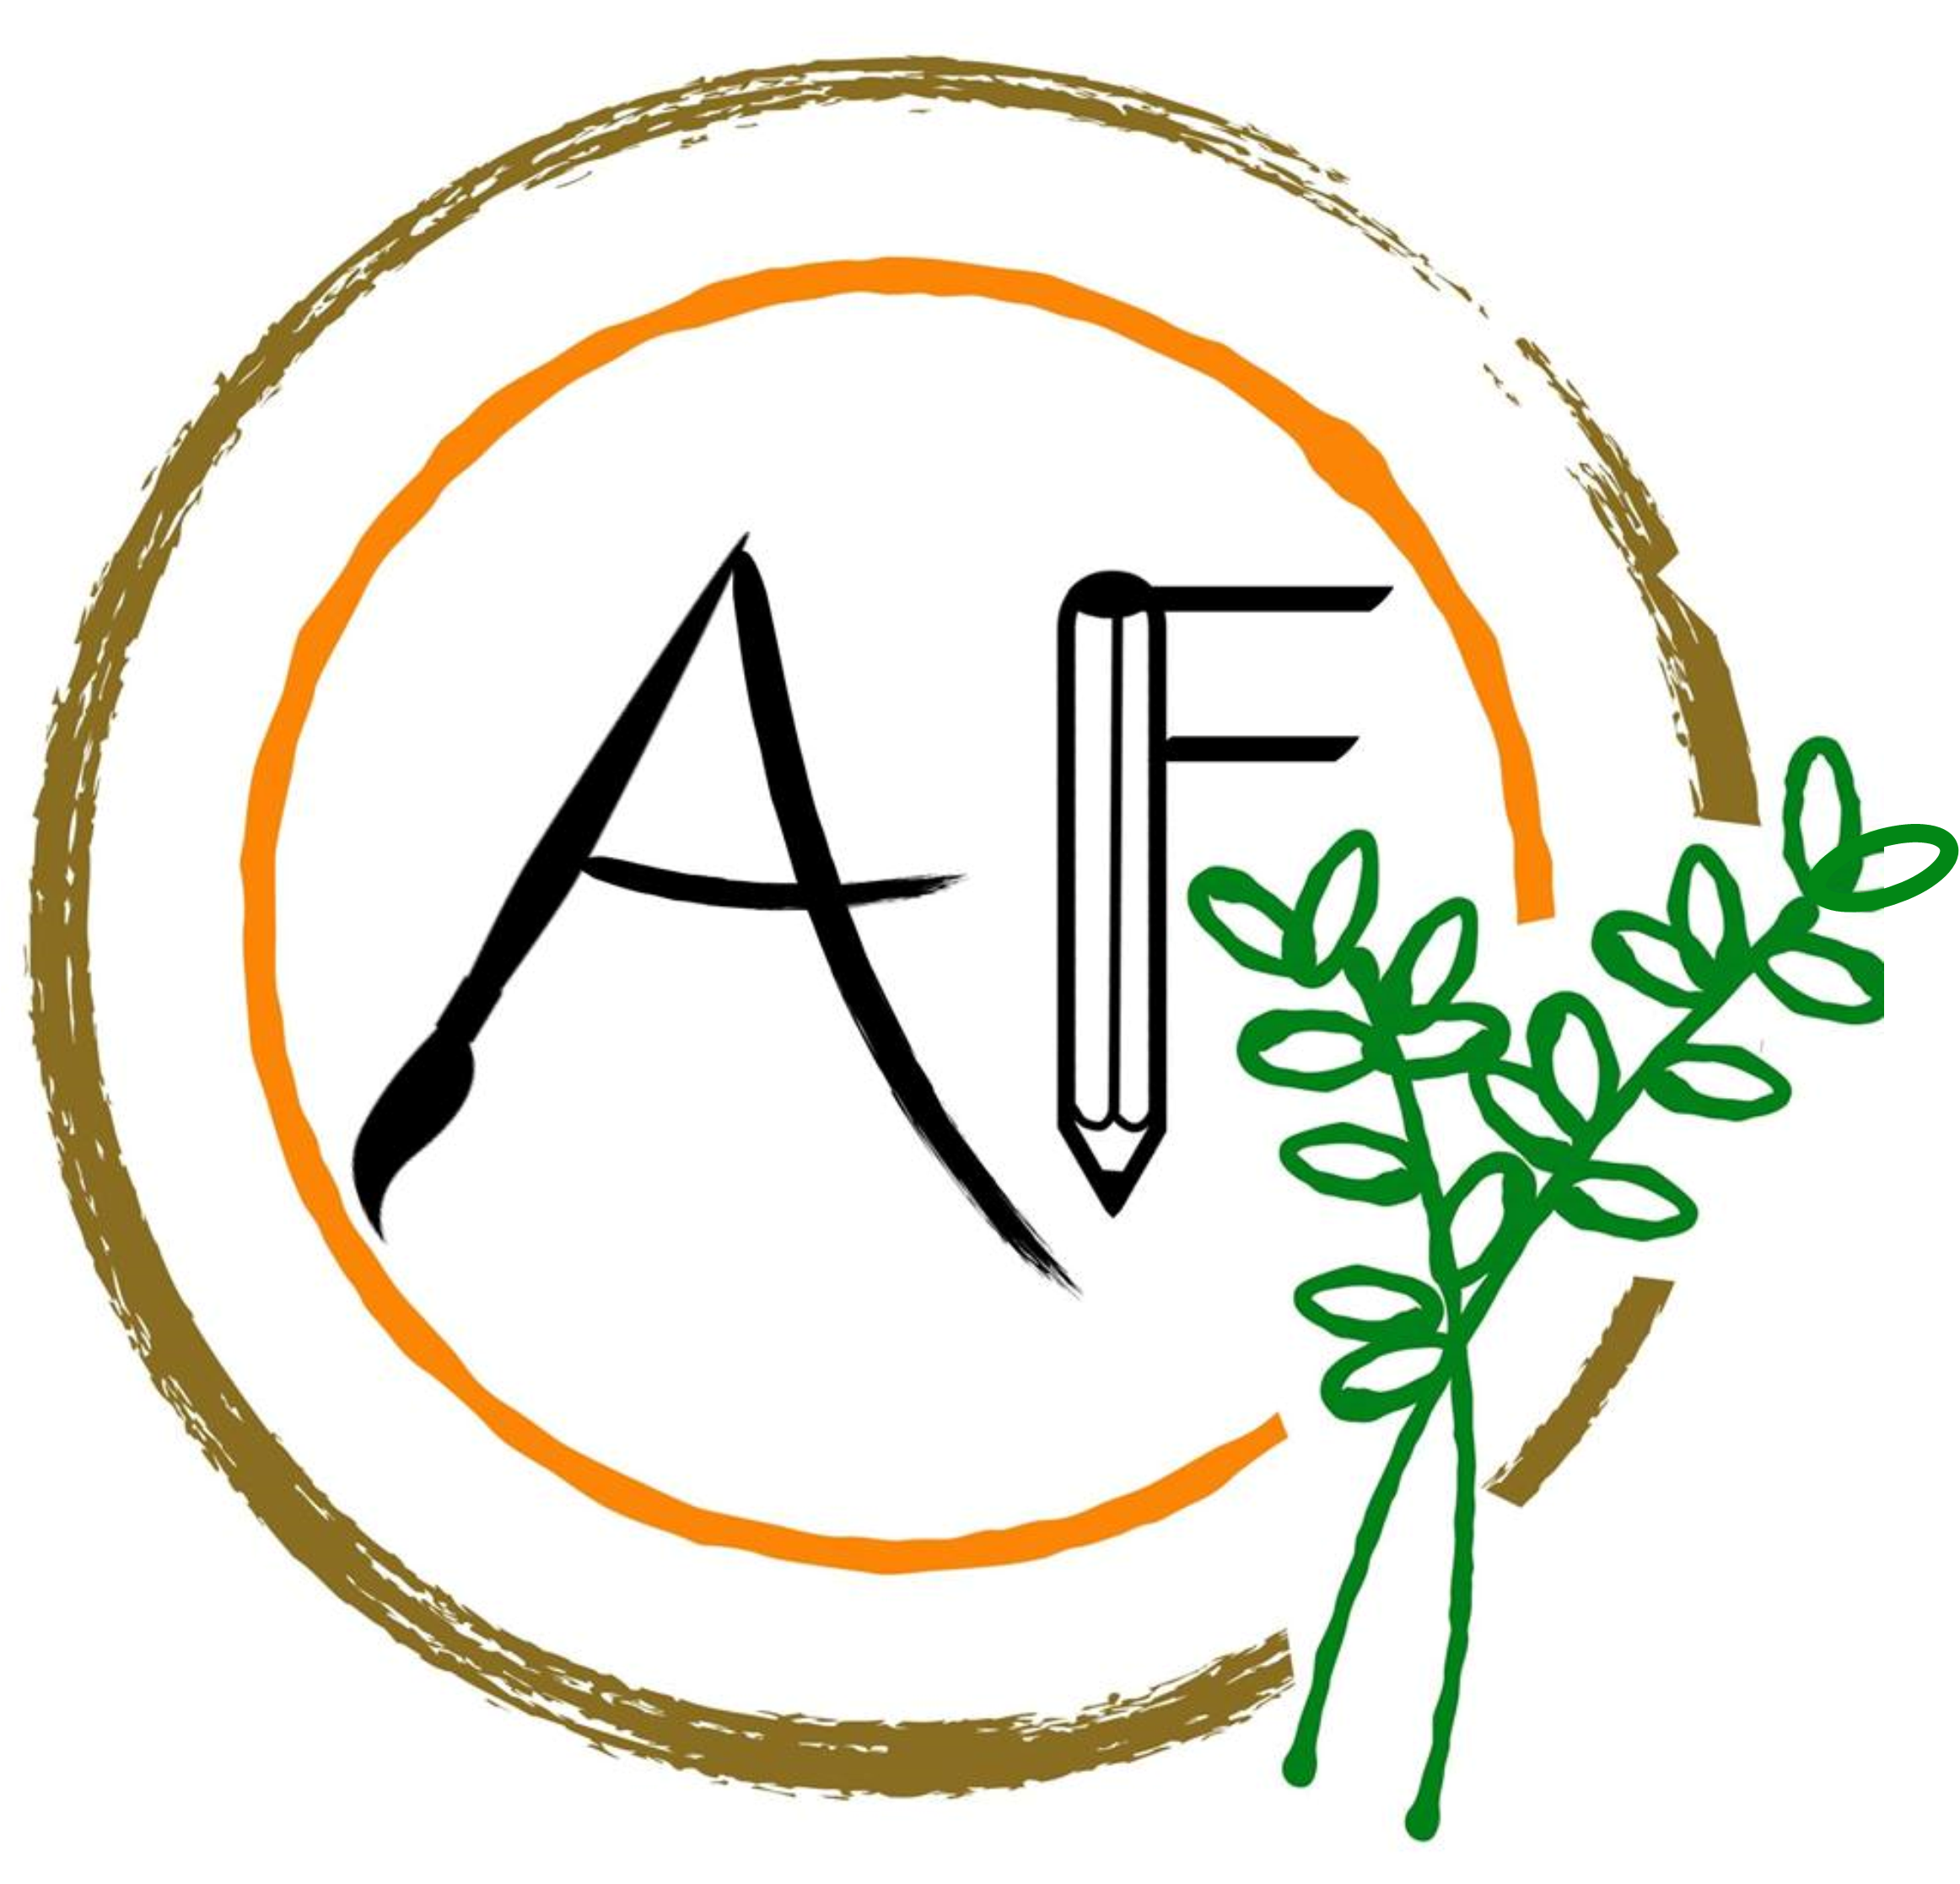 Arty Farty Retreat logo.  AF made of creative implements